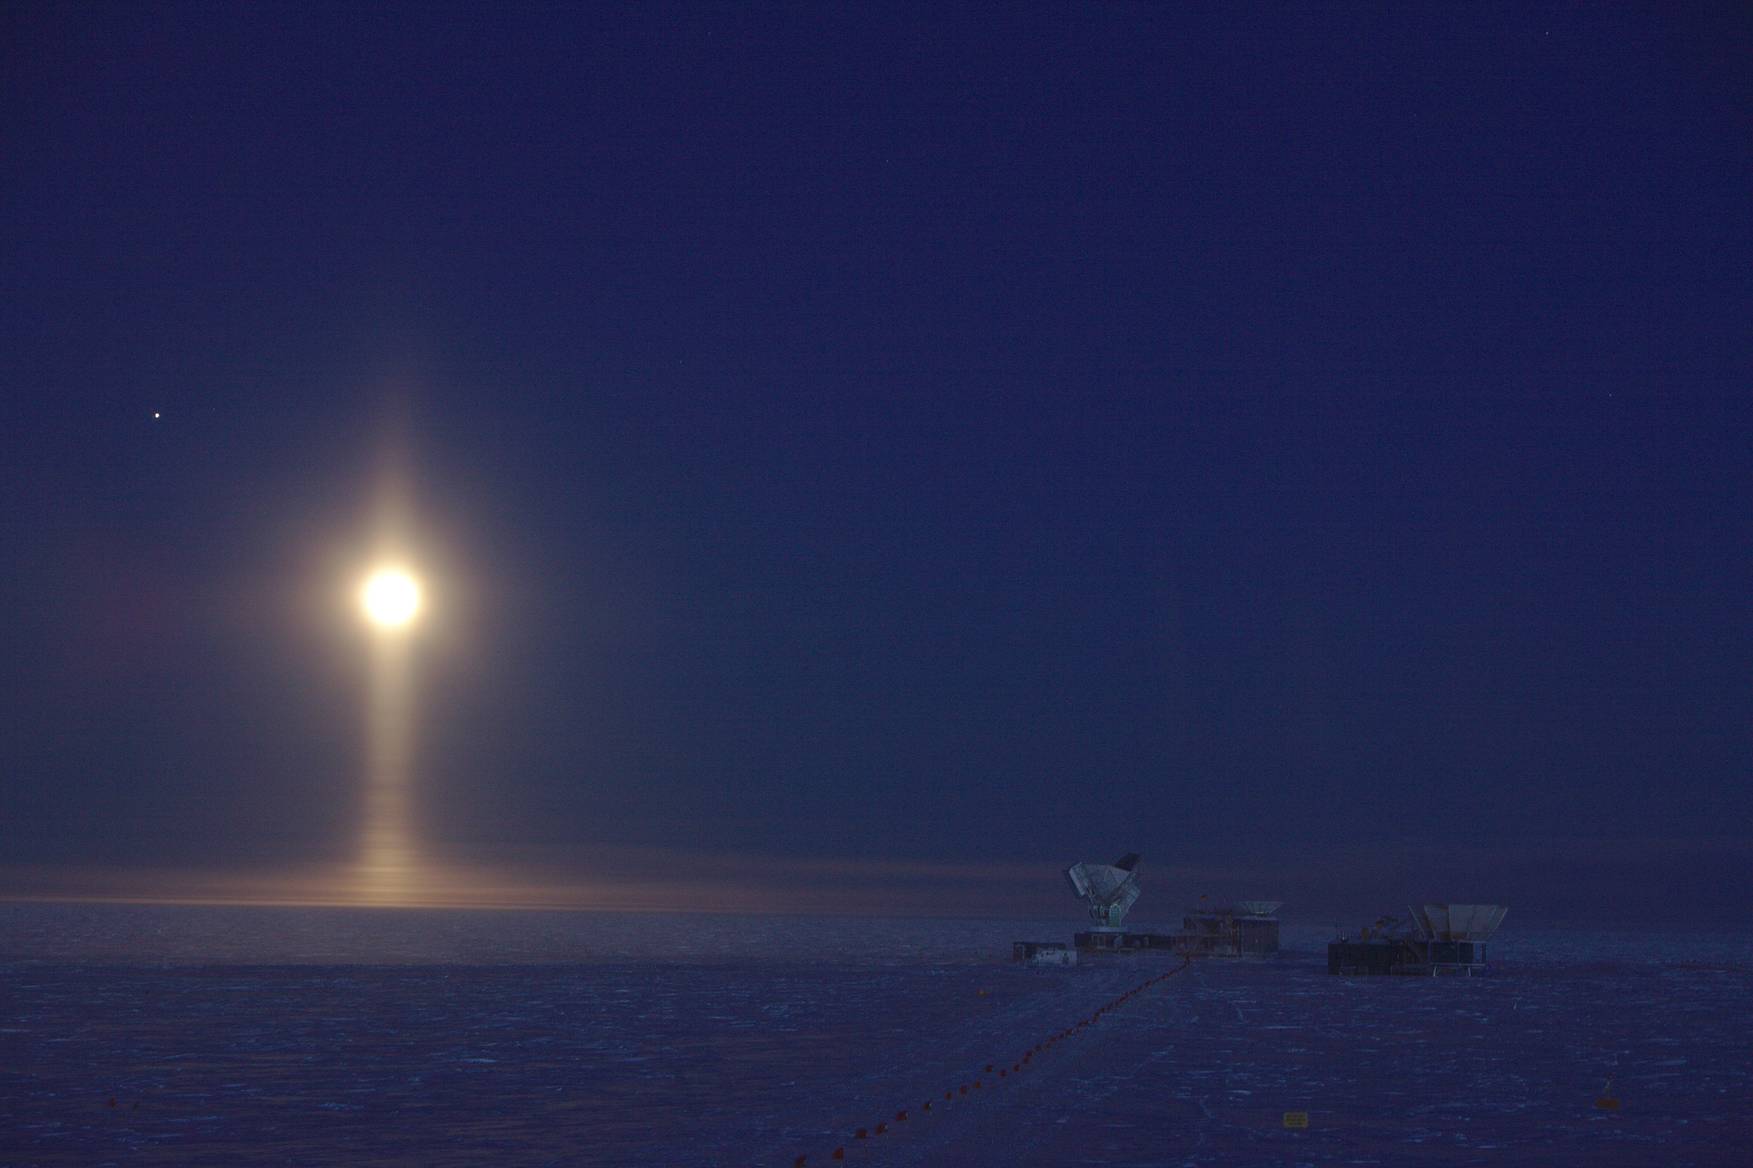 April 2017: The South Pole Telescope during EHT observations. Ice crystals in the atmosphere create a light pillar underneath the Full Moon. The bright speck left of the Moon is Jupiter.